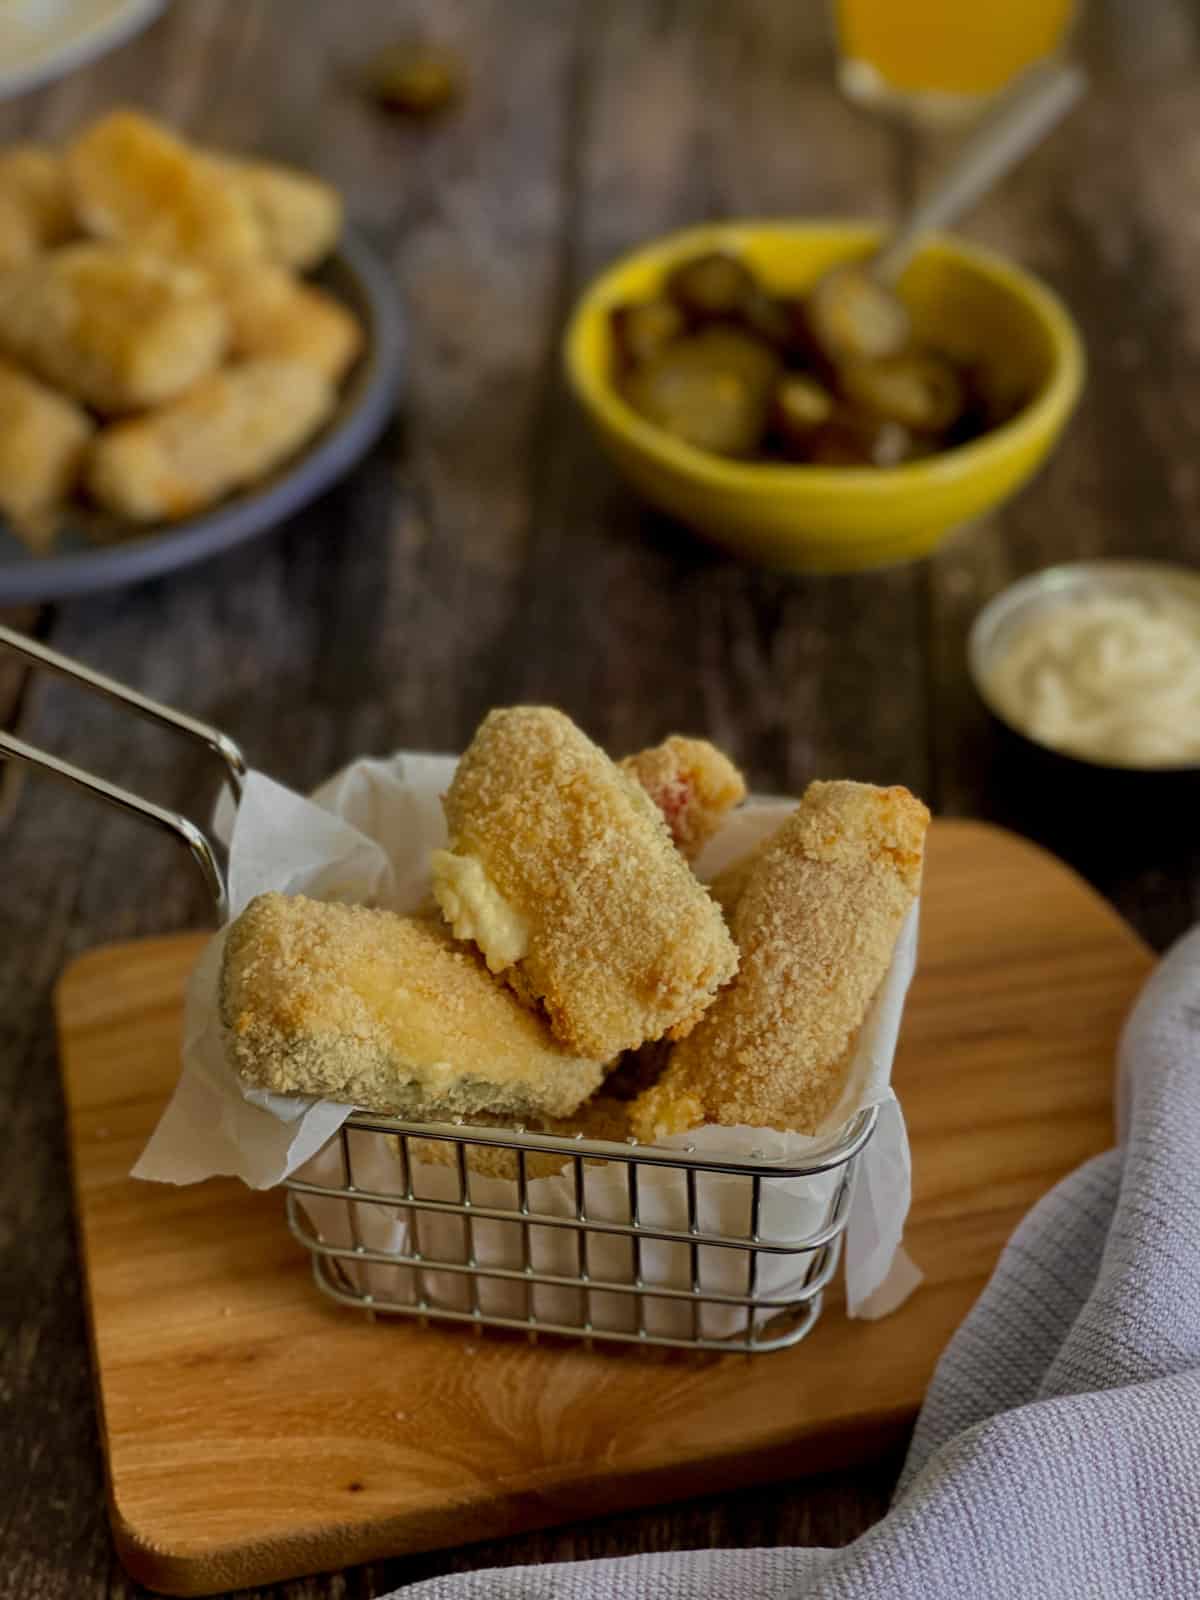 crispy and cheesy jalapeño poppers served in a basket on a board, next to a white cloth and a creamy dip.